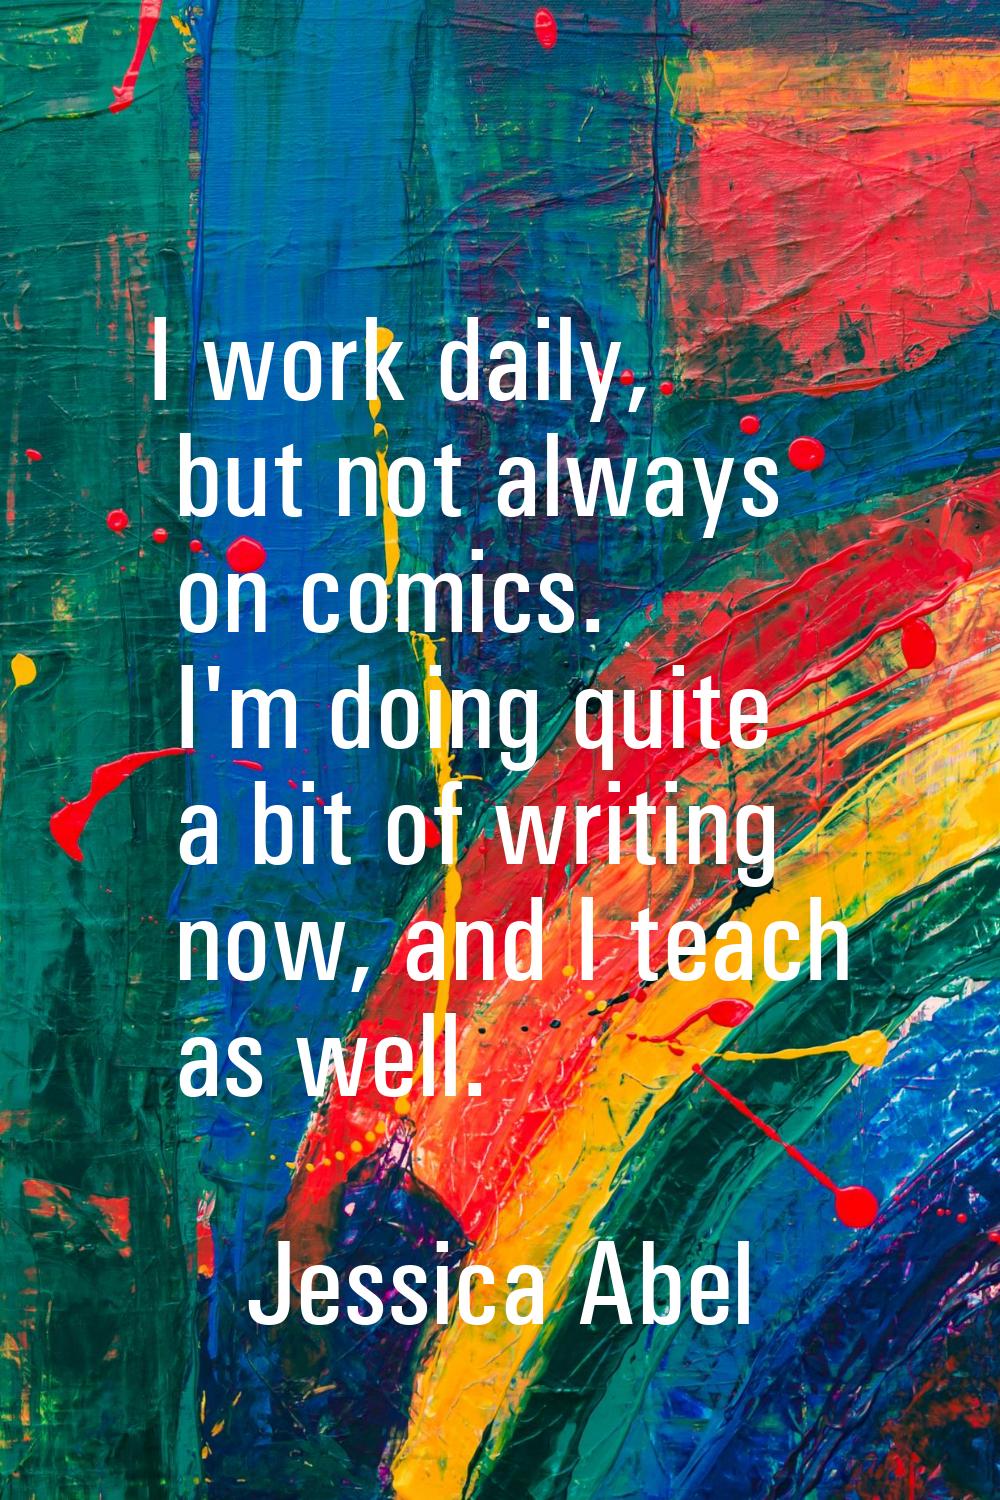 I work daily, but not always on comics. I'm doing quite a bit of writing now, and I teach as well.